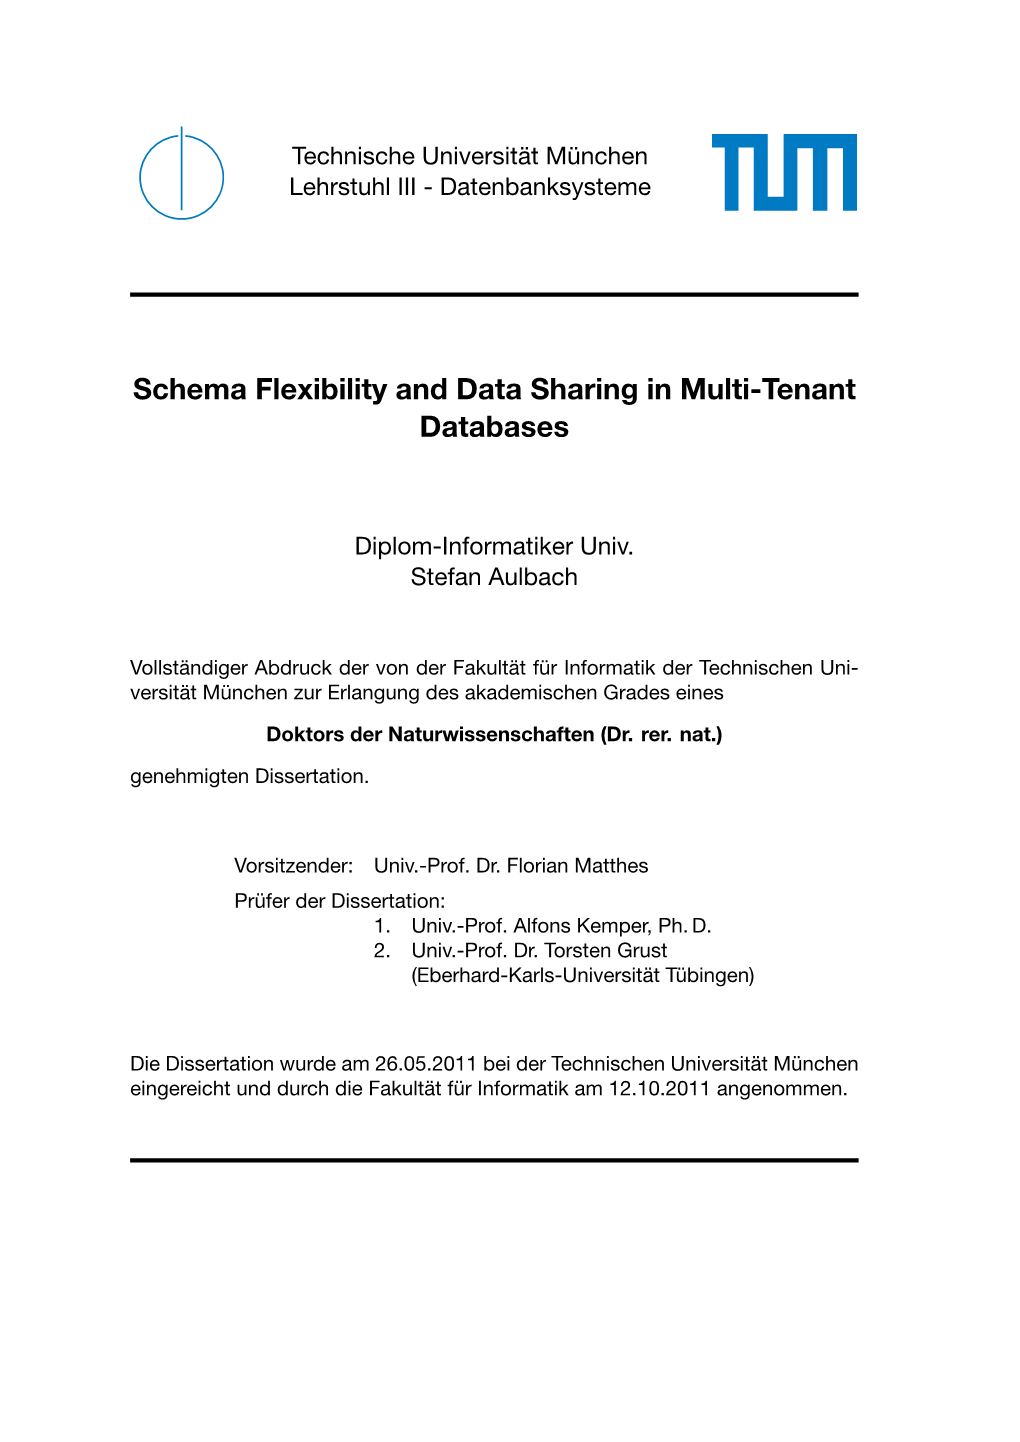 Schema Flexibility and Data Sharing in Multi-Tenant Databases